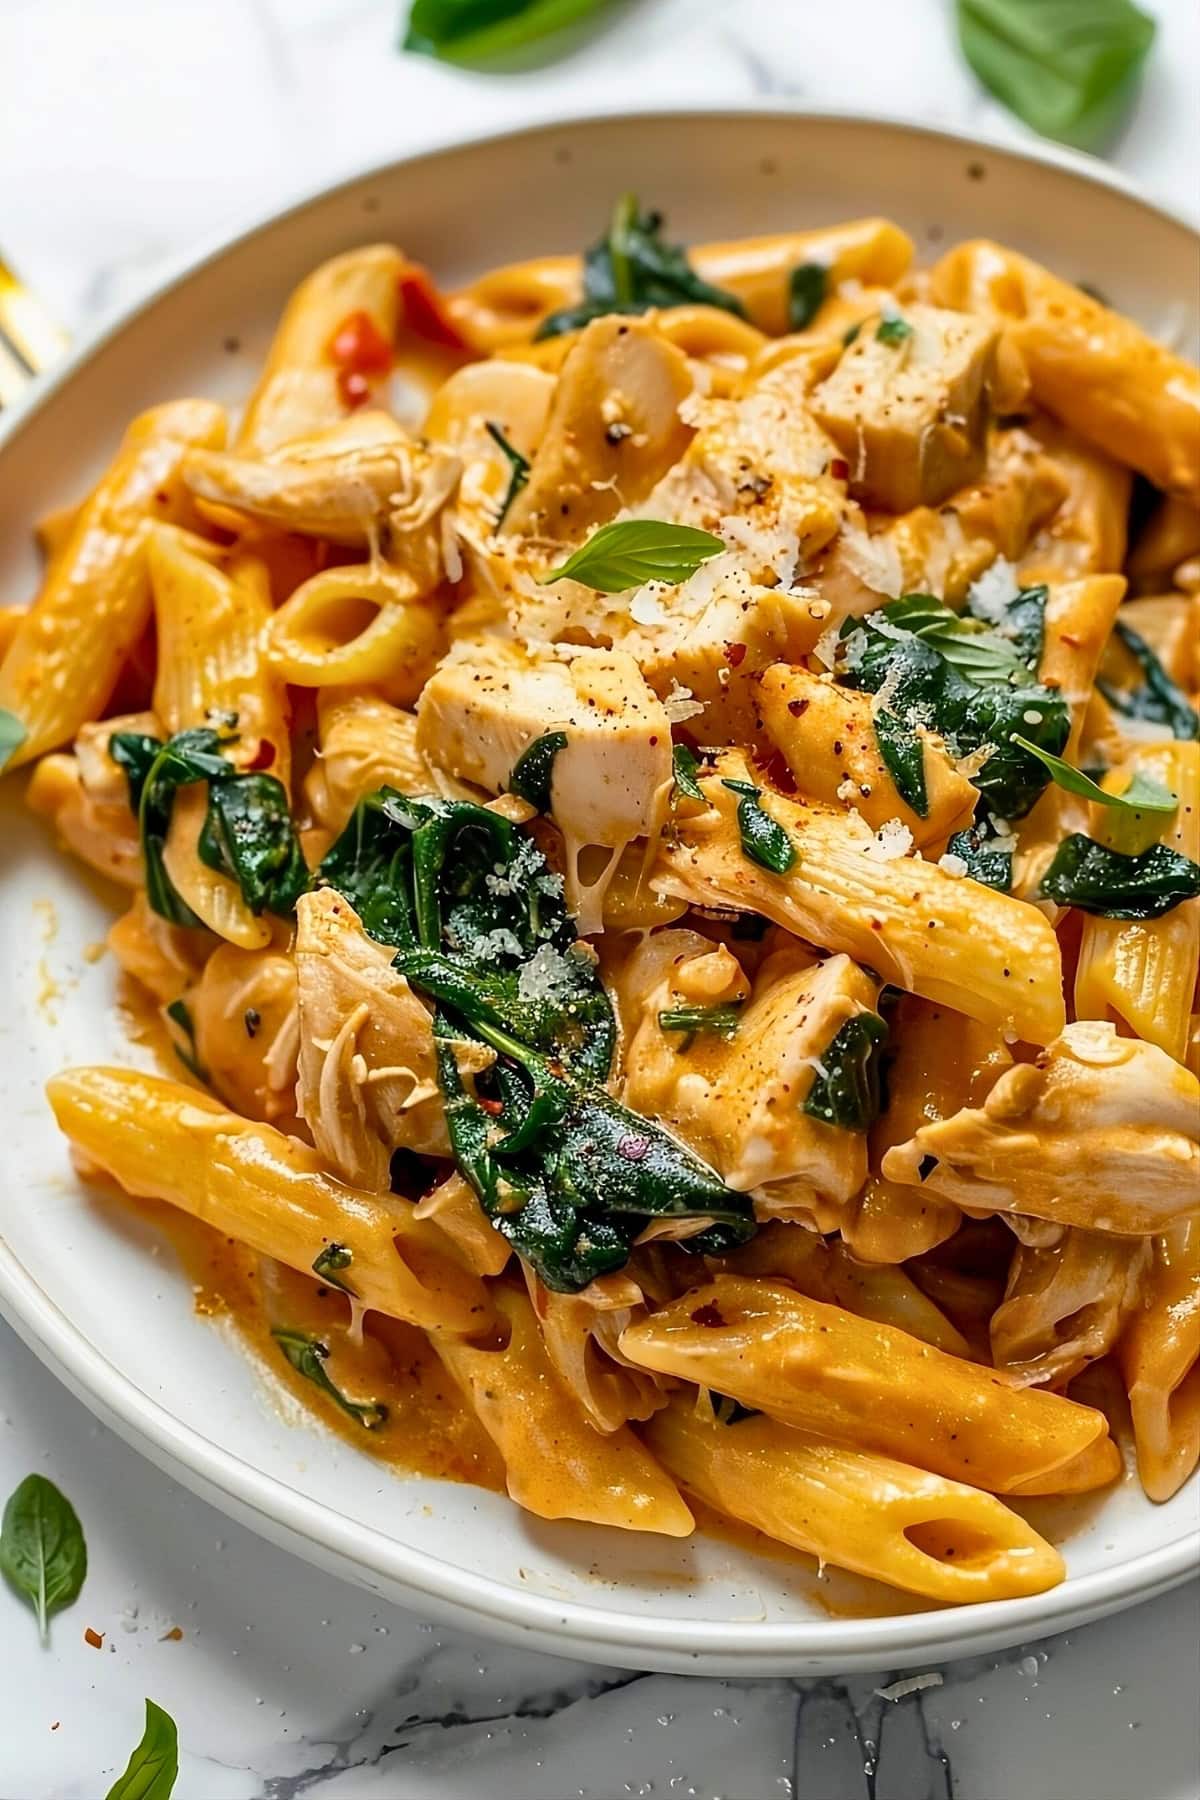 Tuscan chicken pasta with spinach leaves sprinkled with parmesan cheese served in a plate.